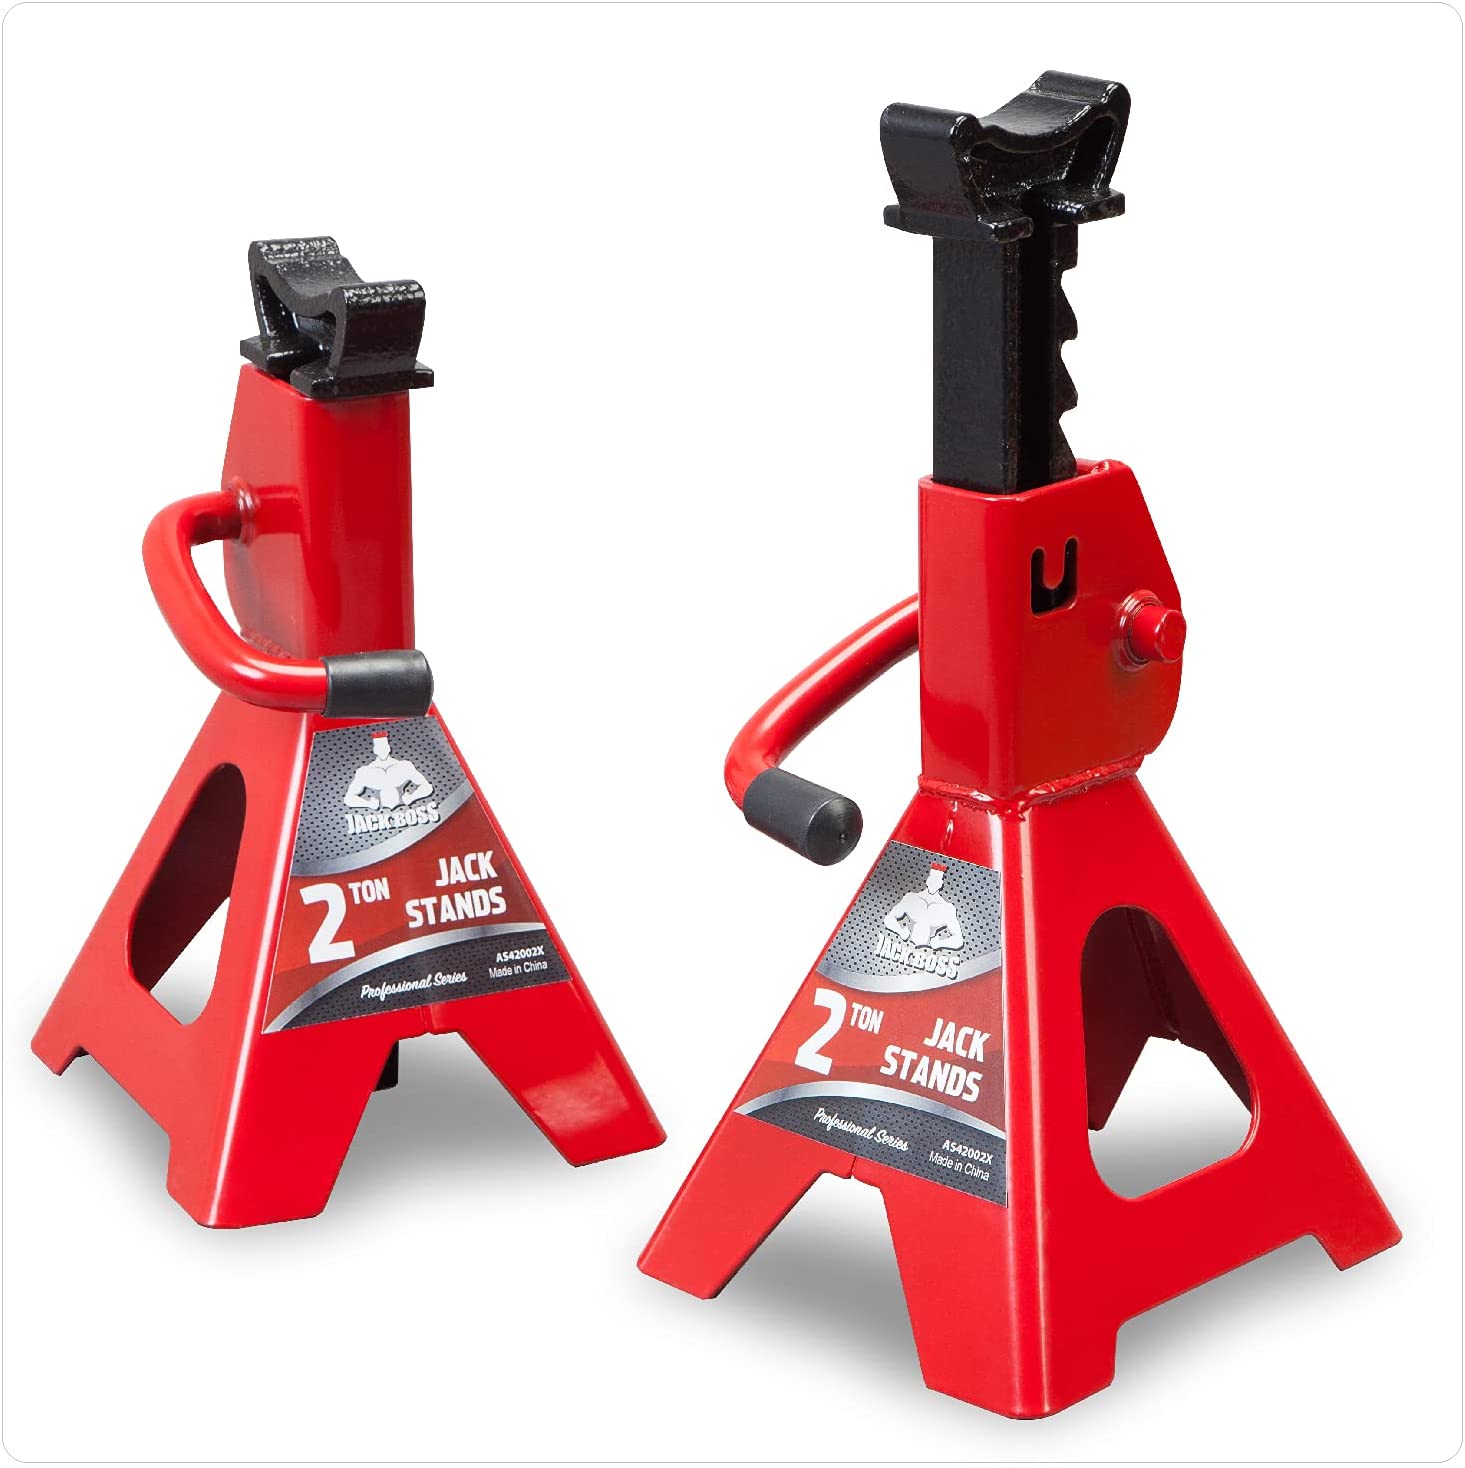 Car Jack Stands 3 Ton Capacity Steel Car Lifting Stand Adjustable Jack Stand Tools